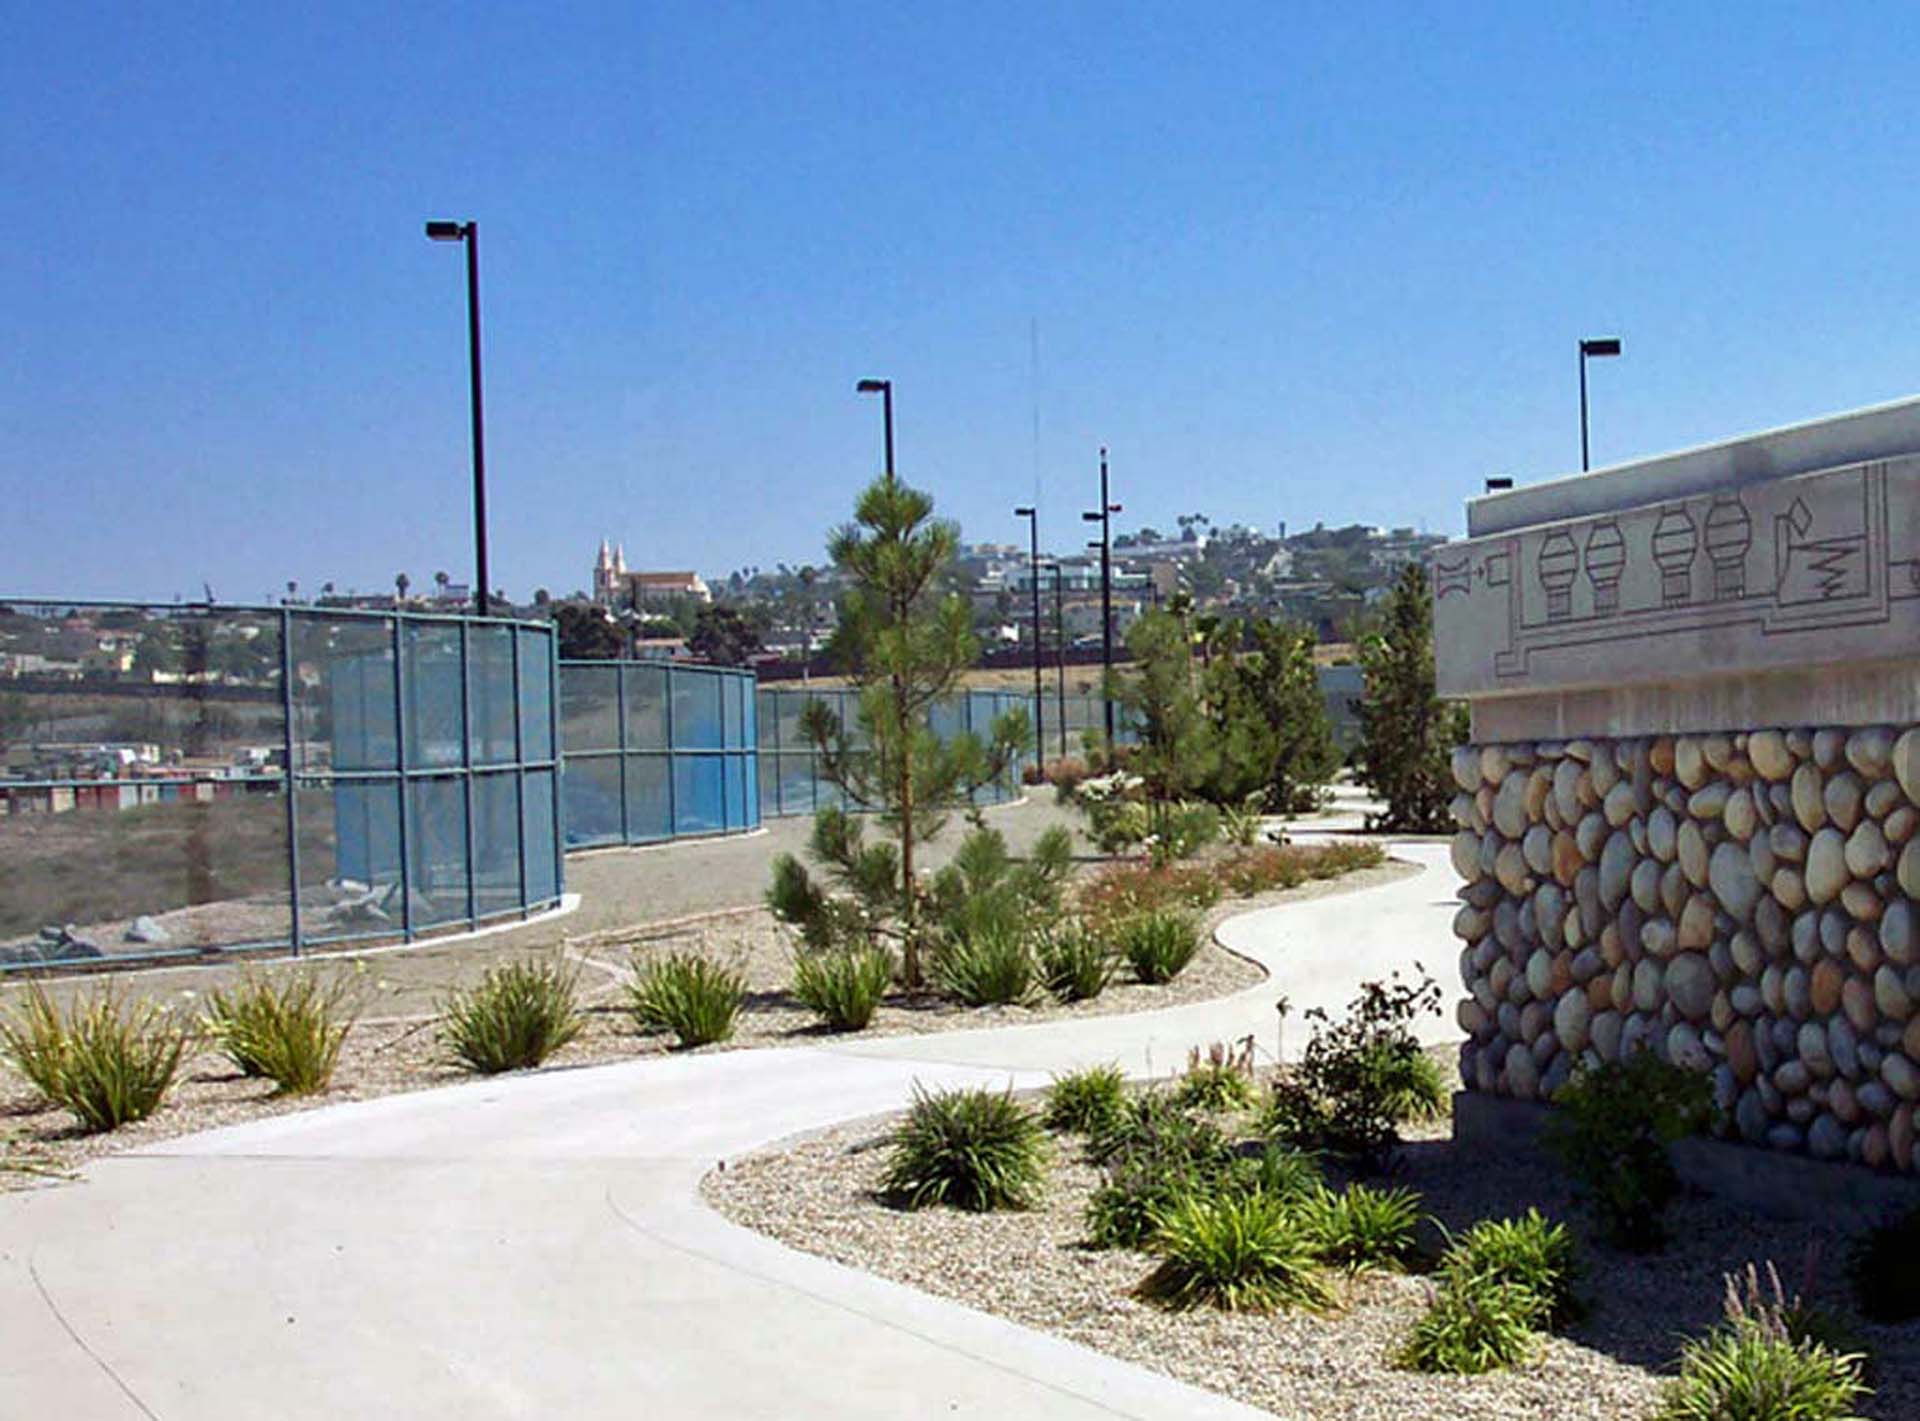 Perimeter Fence - South Bay Water Reclamation Plant